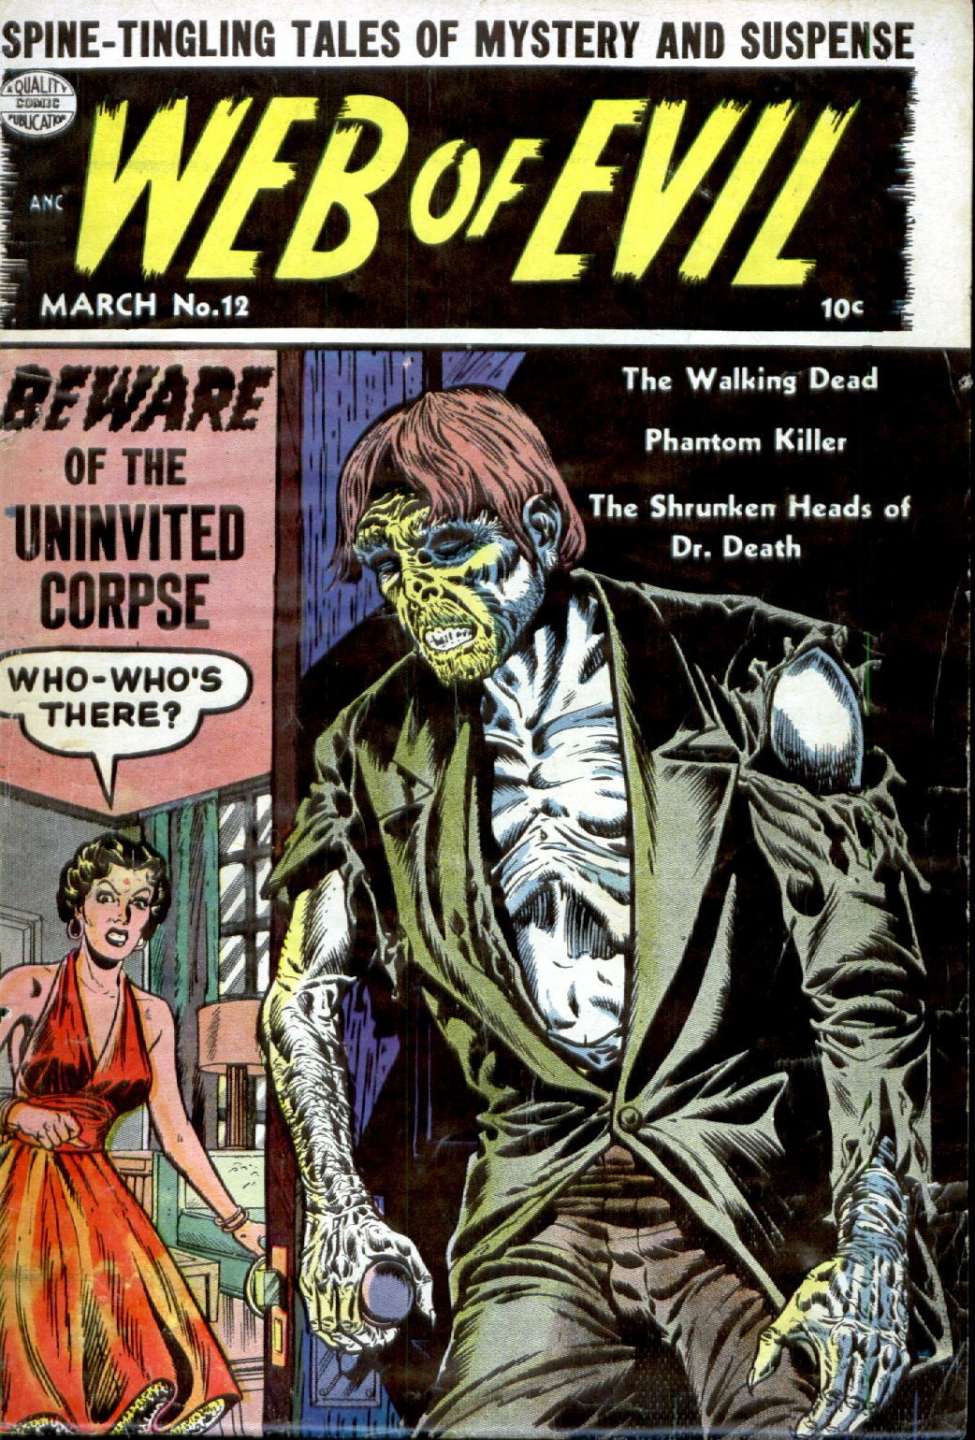 Comic Book Cover For Web of Evil 12